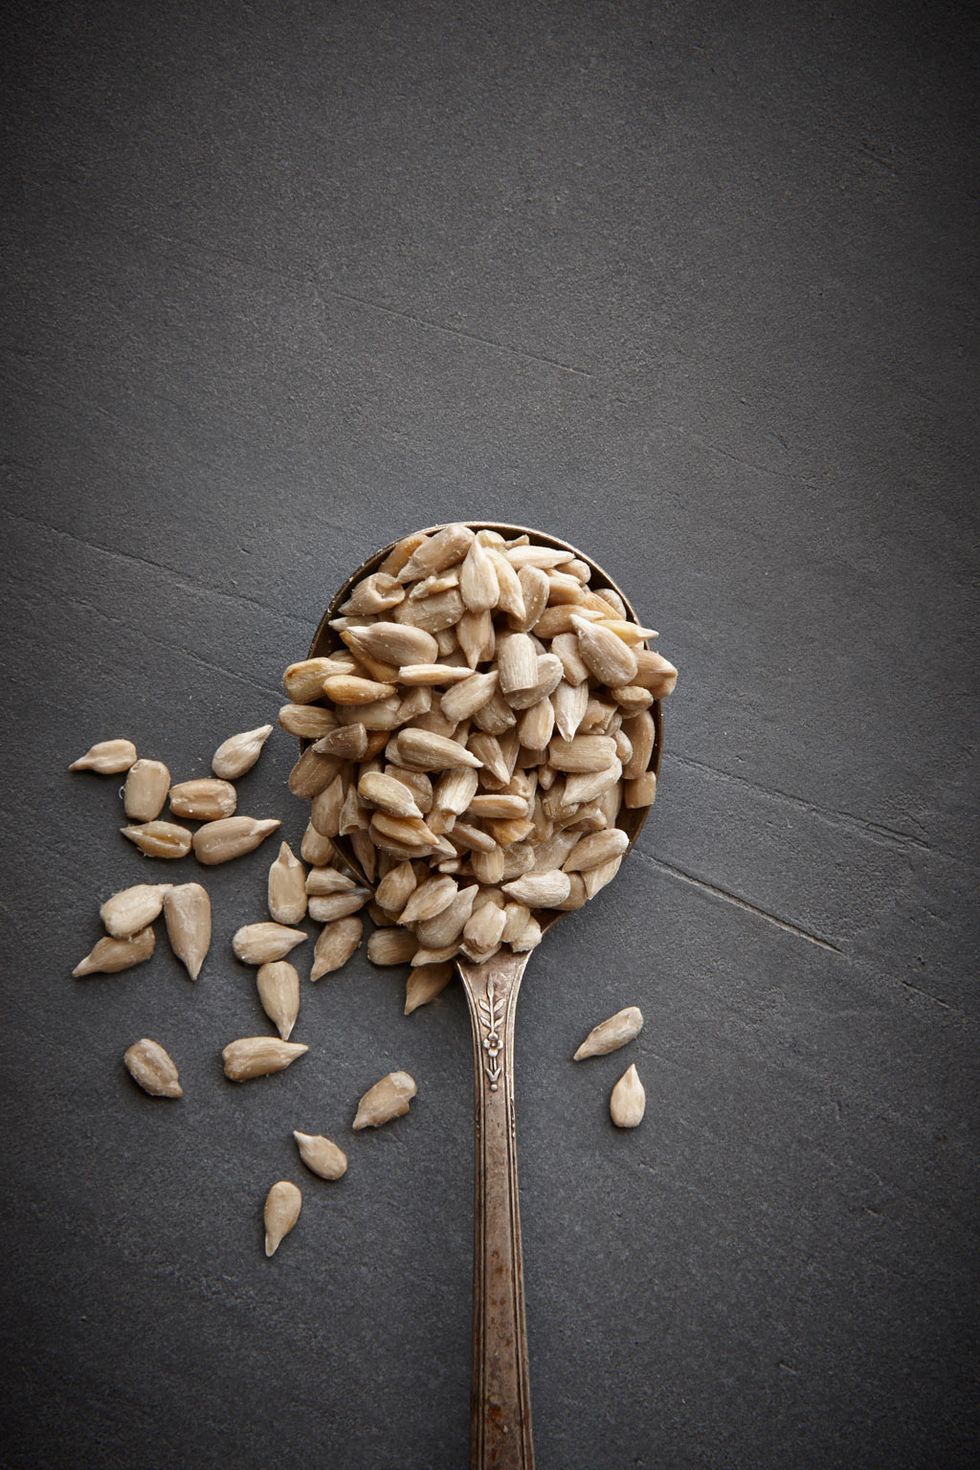 Ingredient, Produce, Nuts & seeds, Seed, Nut, Flowering plant, Kitchen utensil, Cereal, Natural material, Still life photography, 